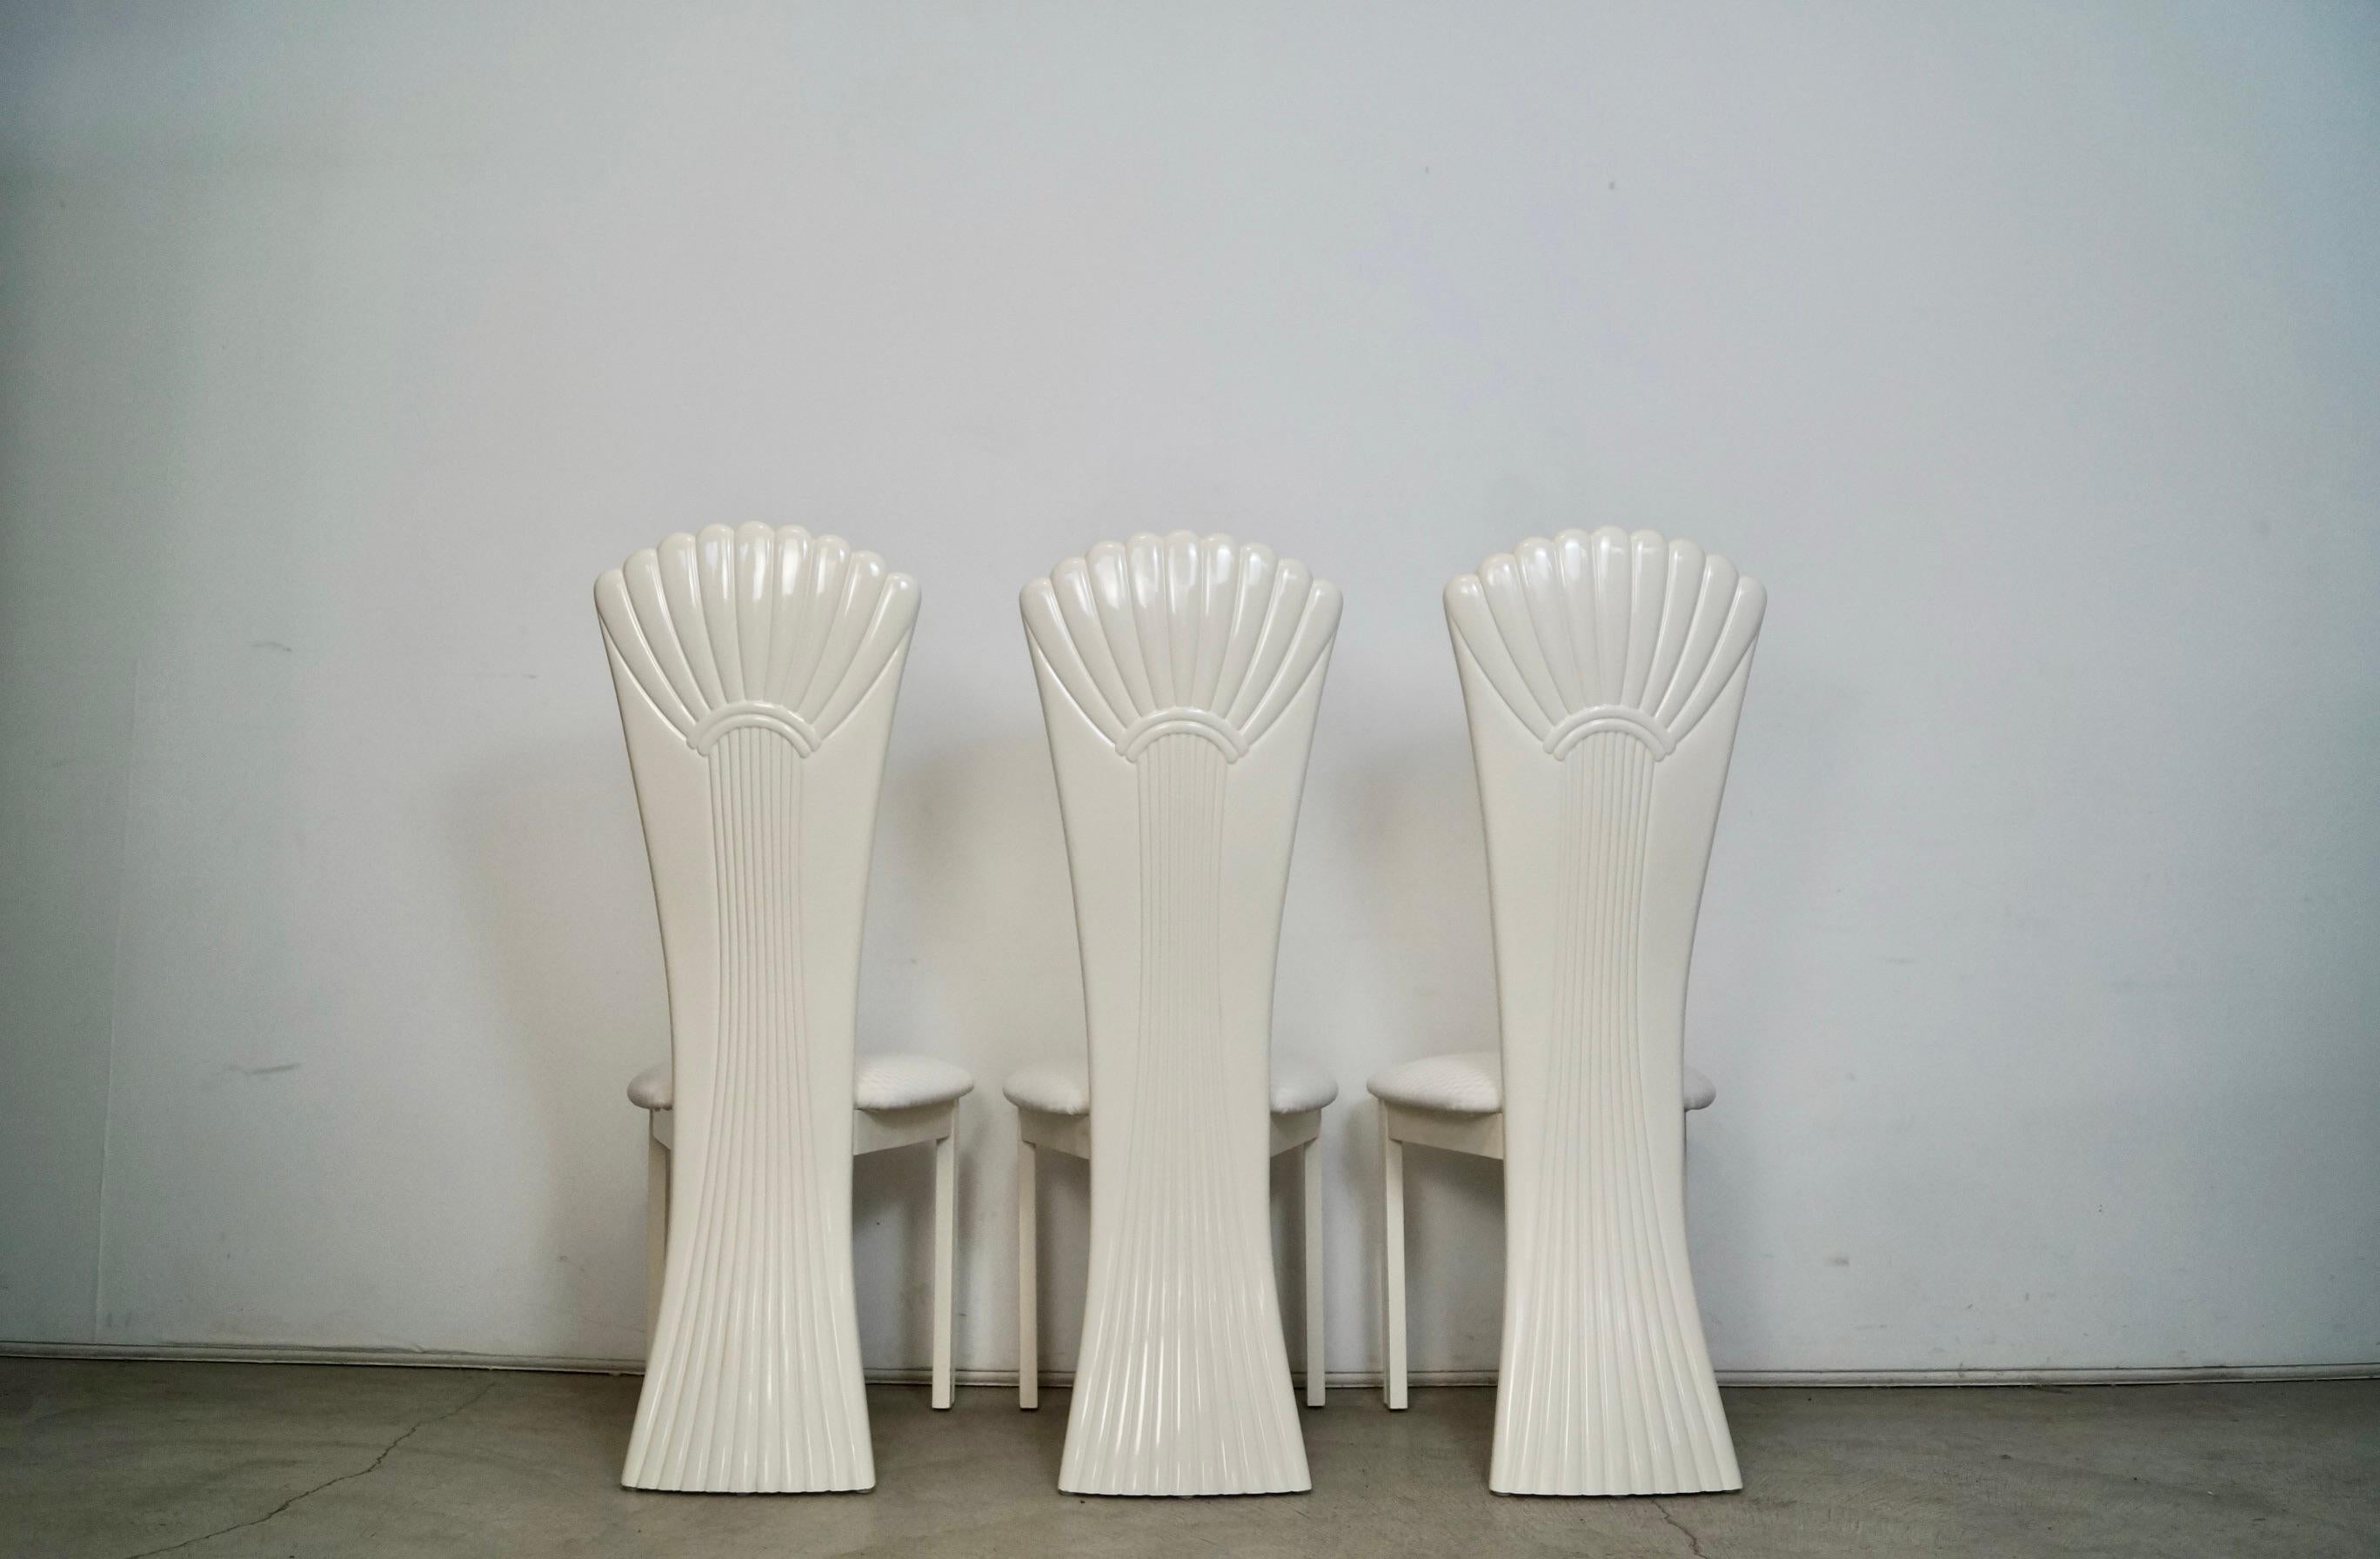 1980's Italian Postmodern Art Deco Najarian Dining Chairs - Set of 3 In Good Condition For Sale In Burbank, CA